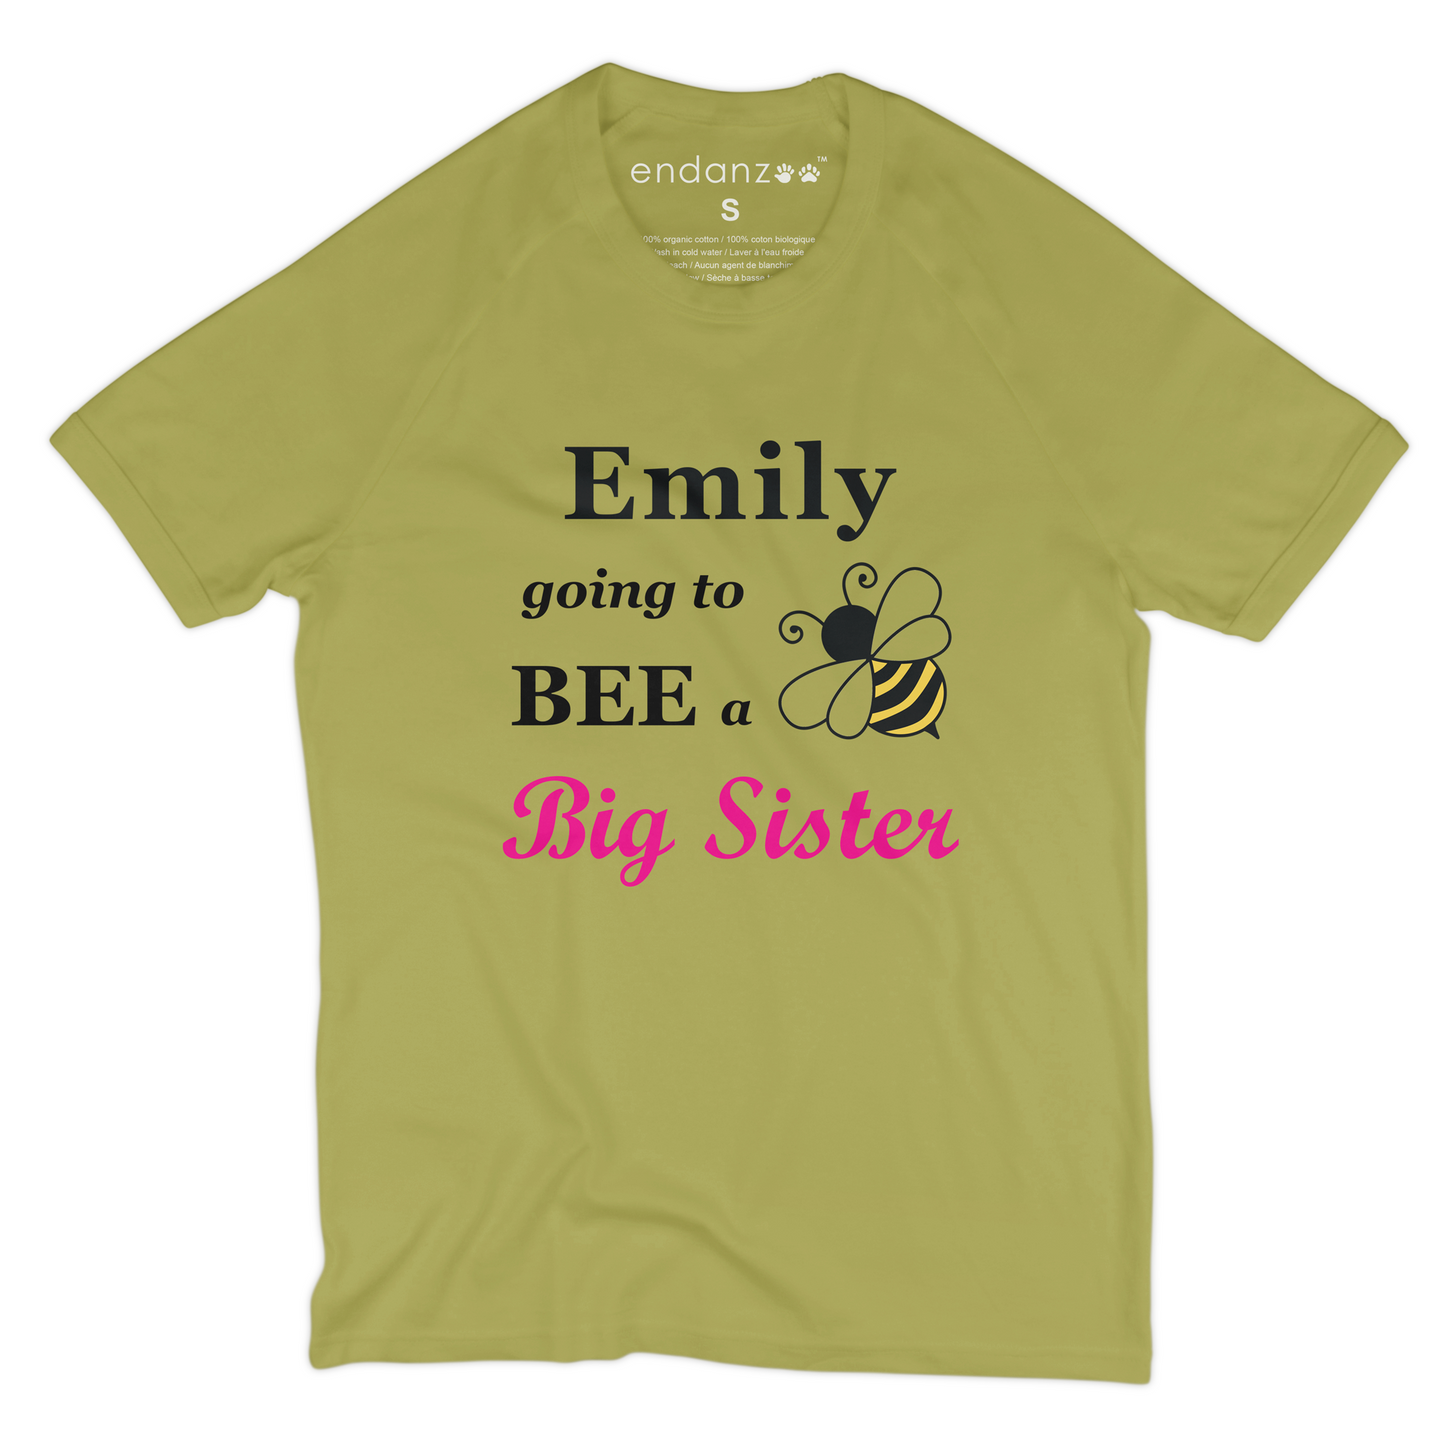 [Personalized] Going to BEE Big Sister Organic Kids Tee Shirt